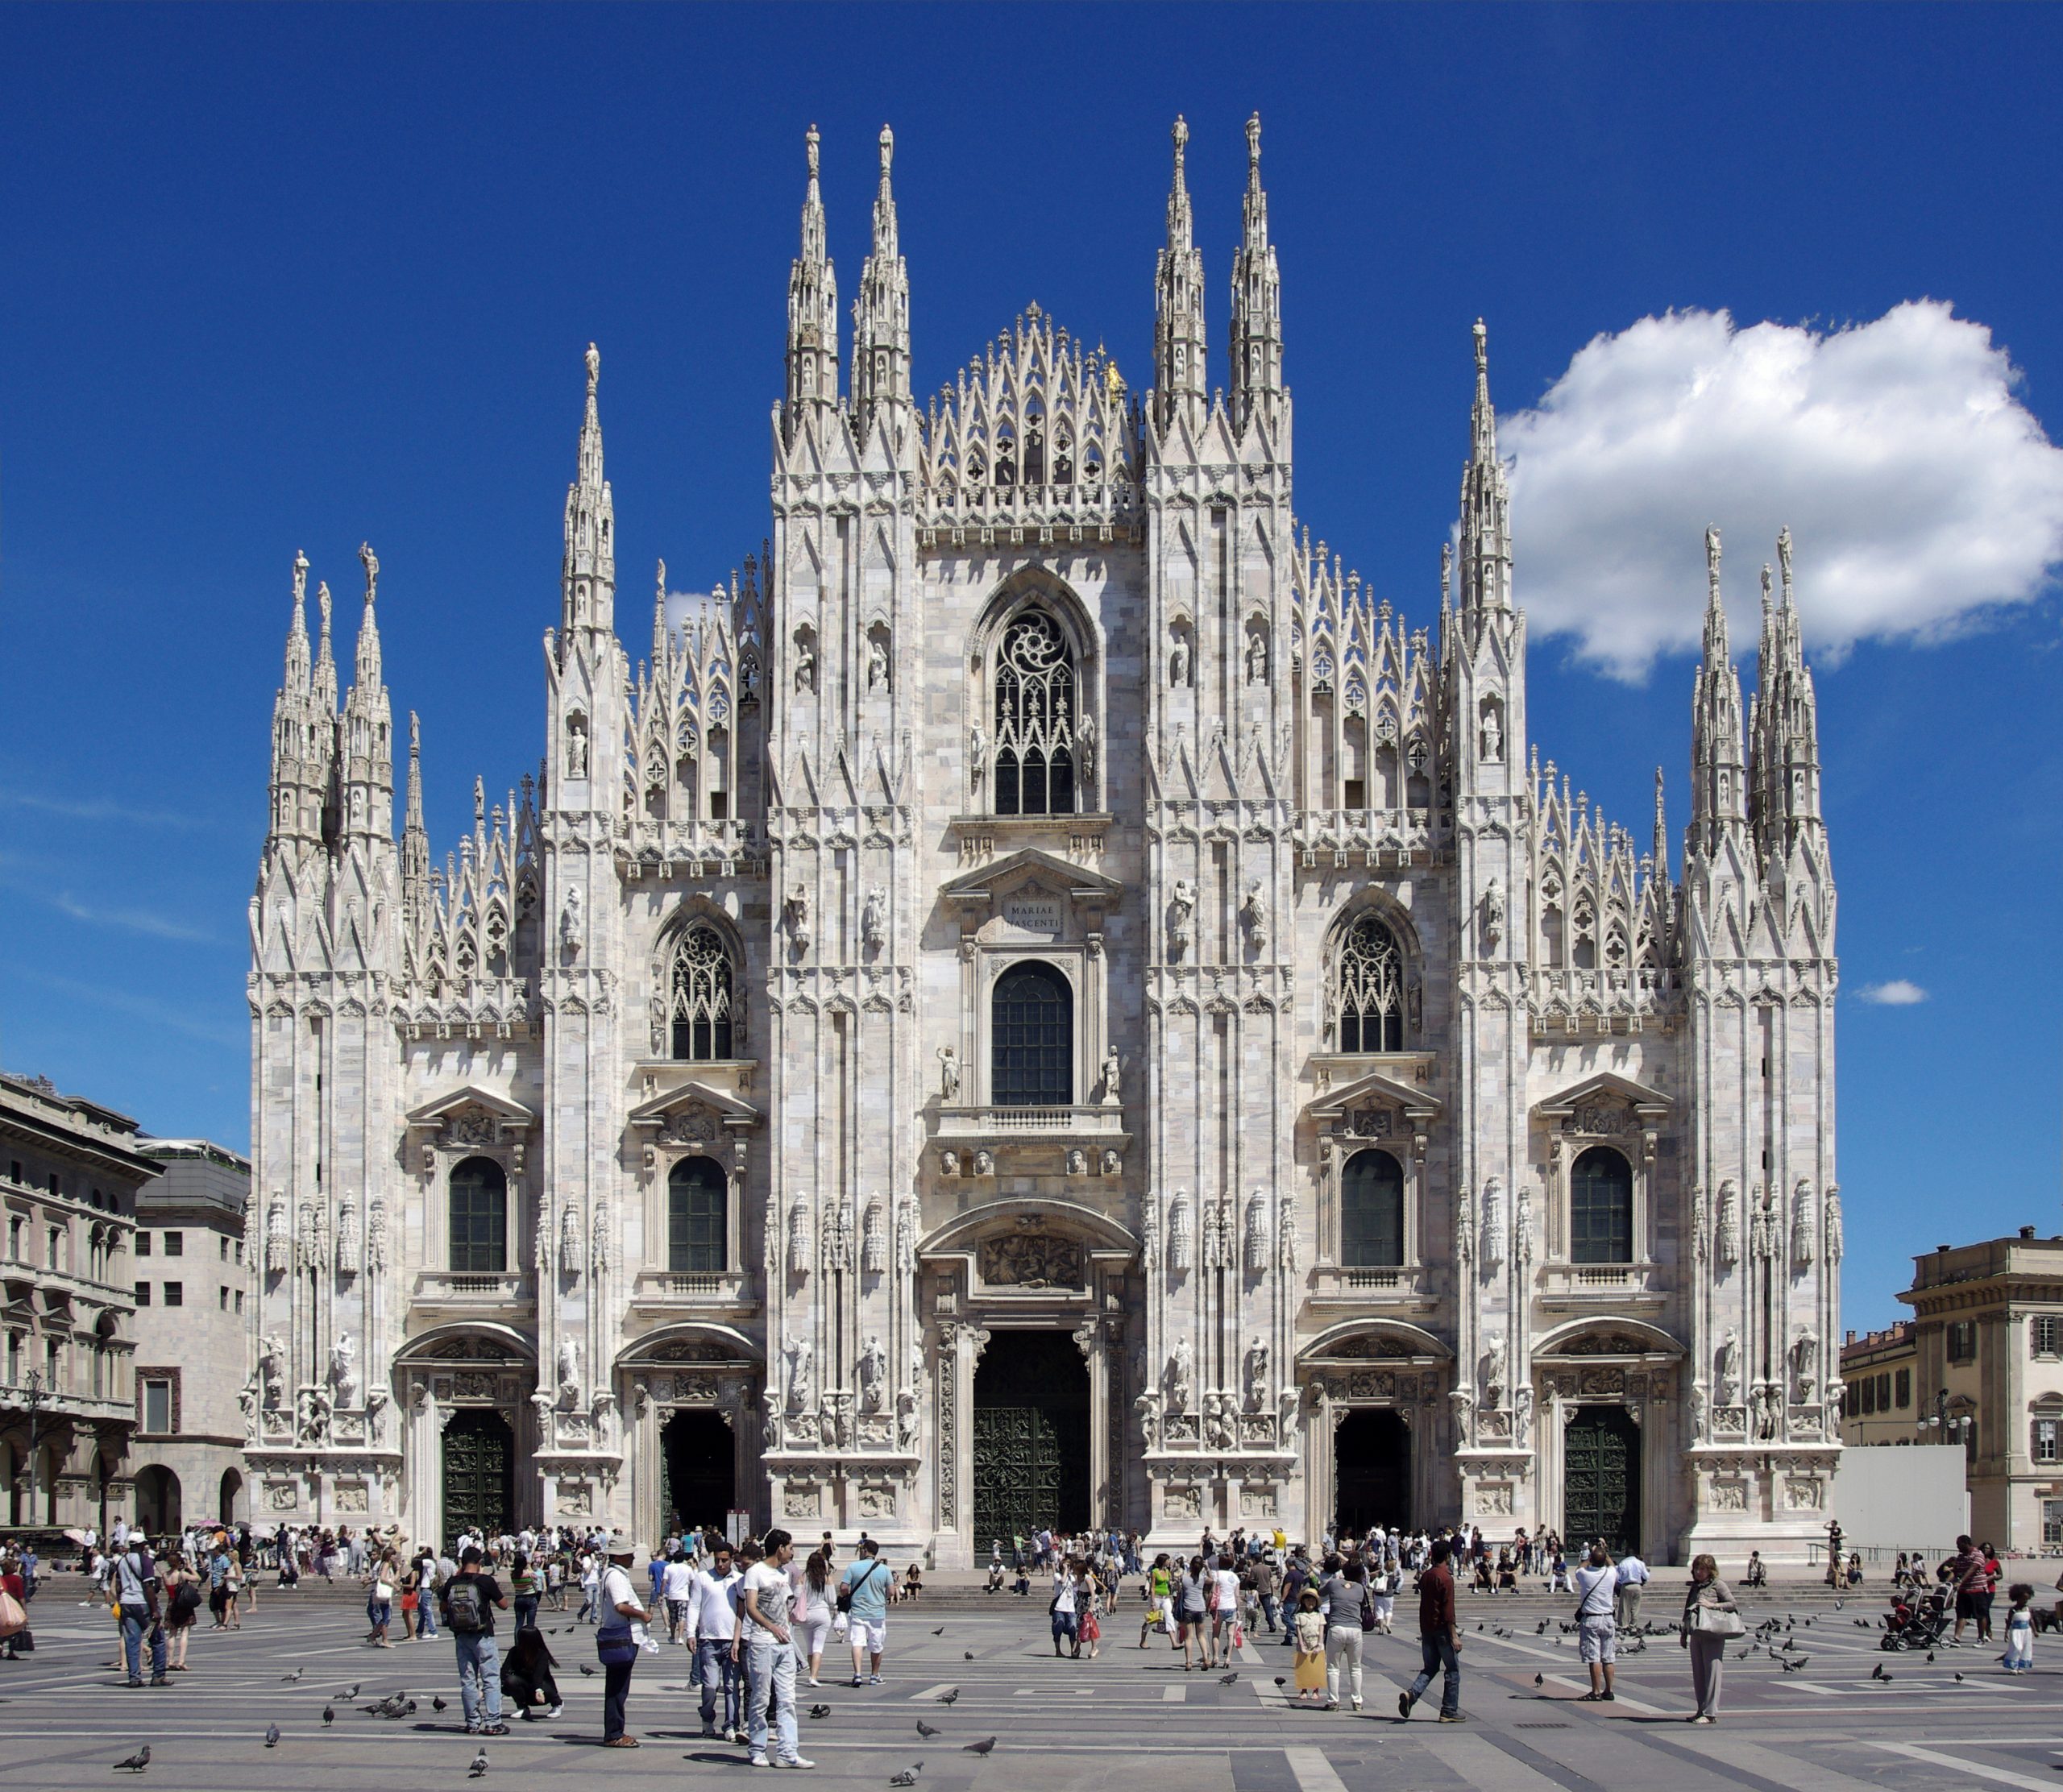 Top Places To Visit In Milan in 2020 If You’re a True Design Lover!